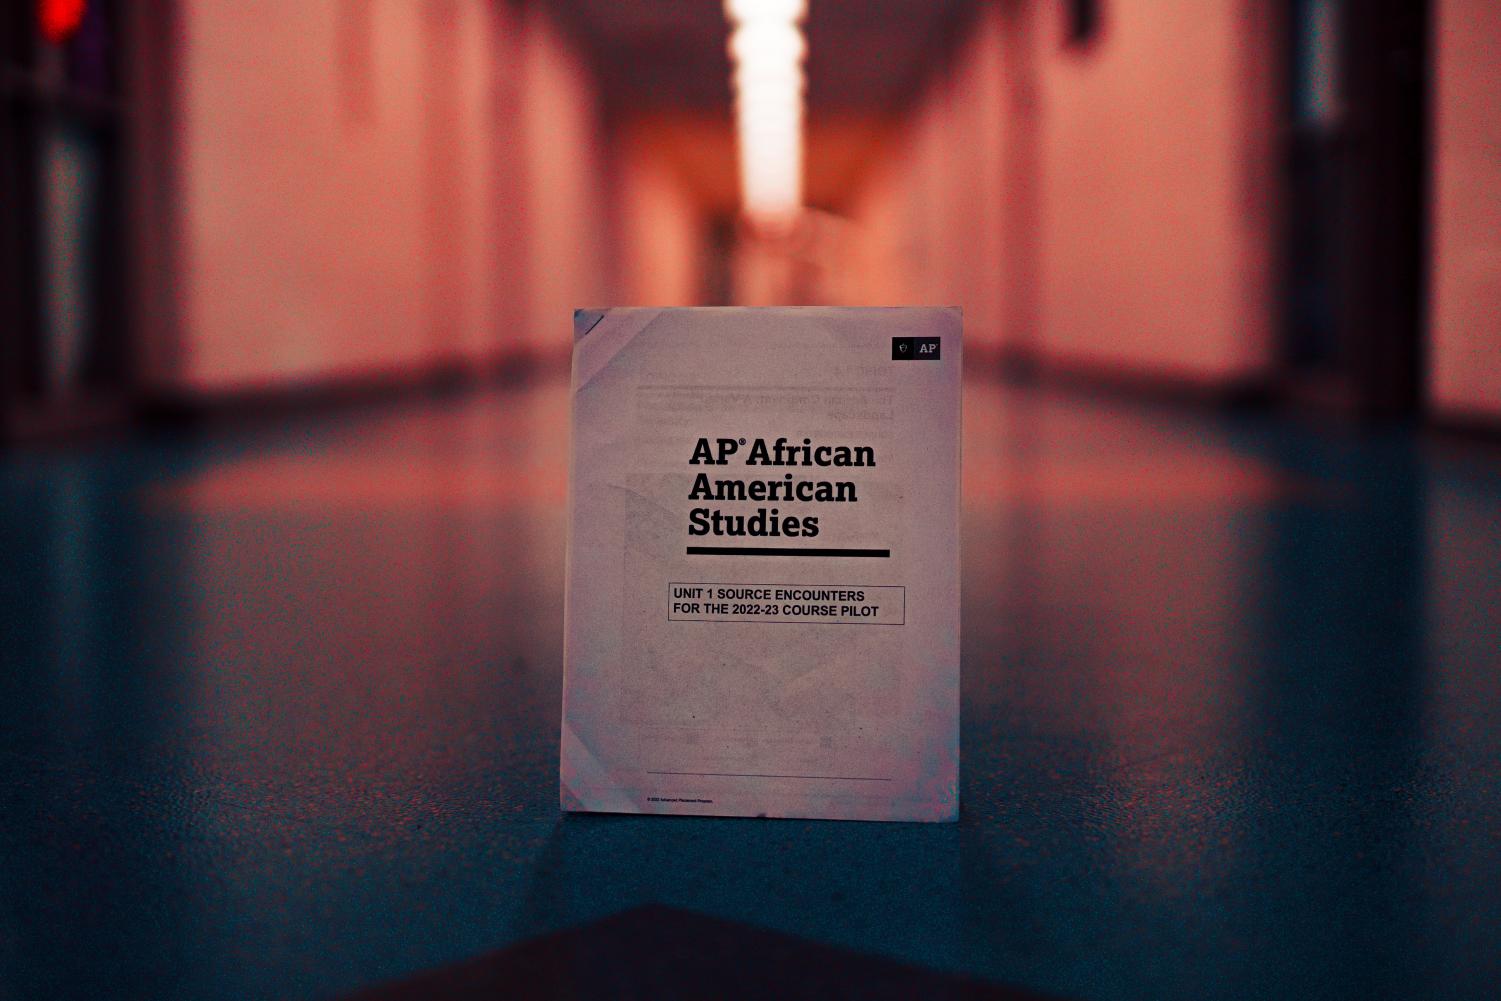 APAAS is the first Black studies course by the College Board.